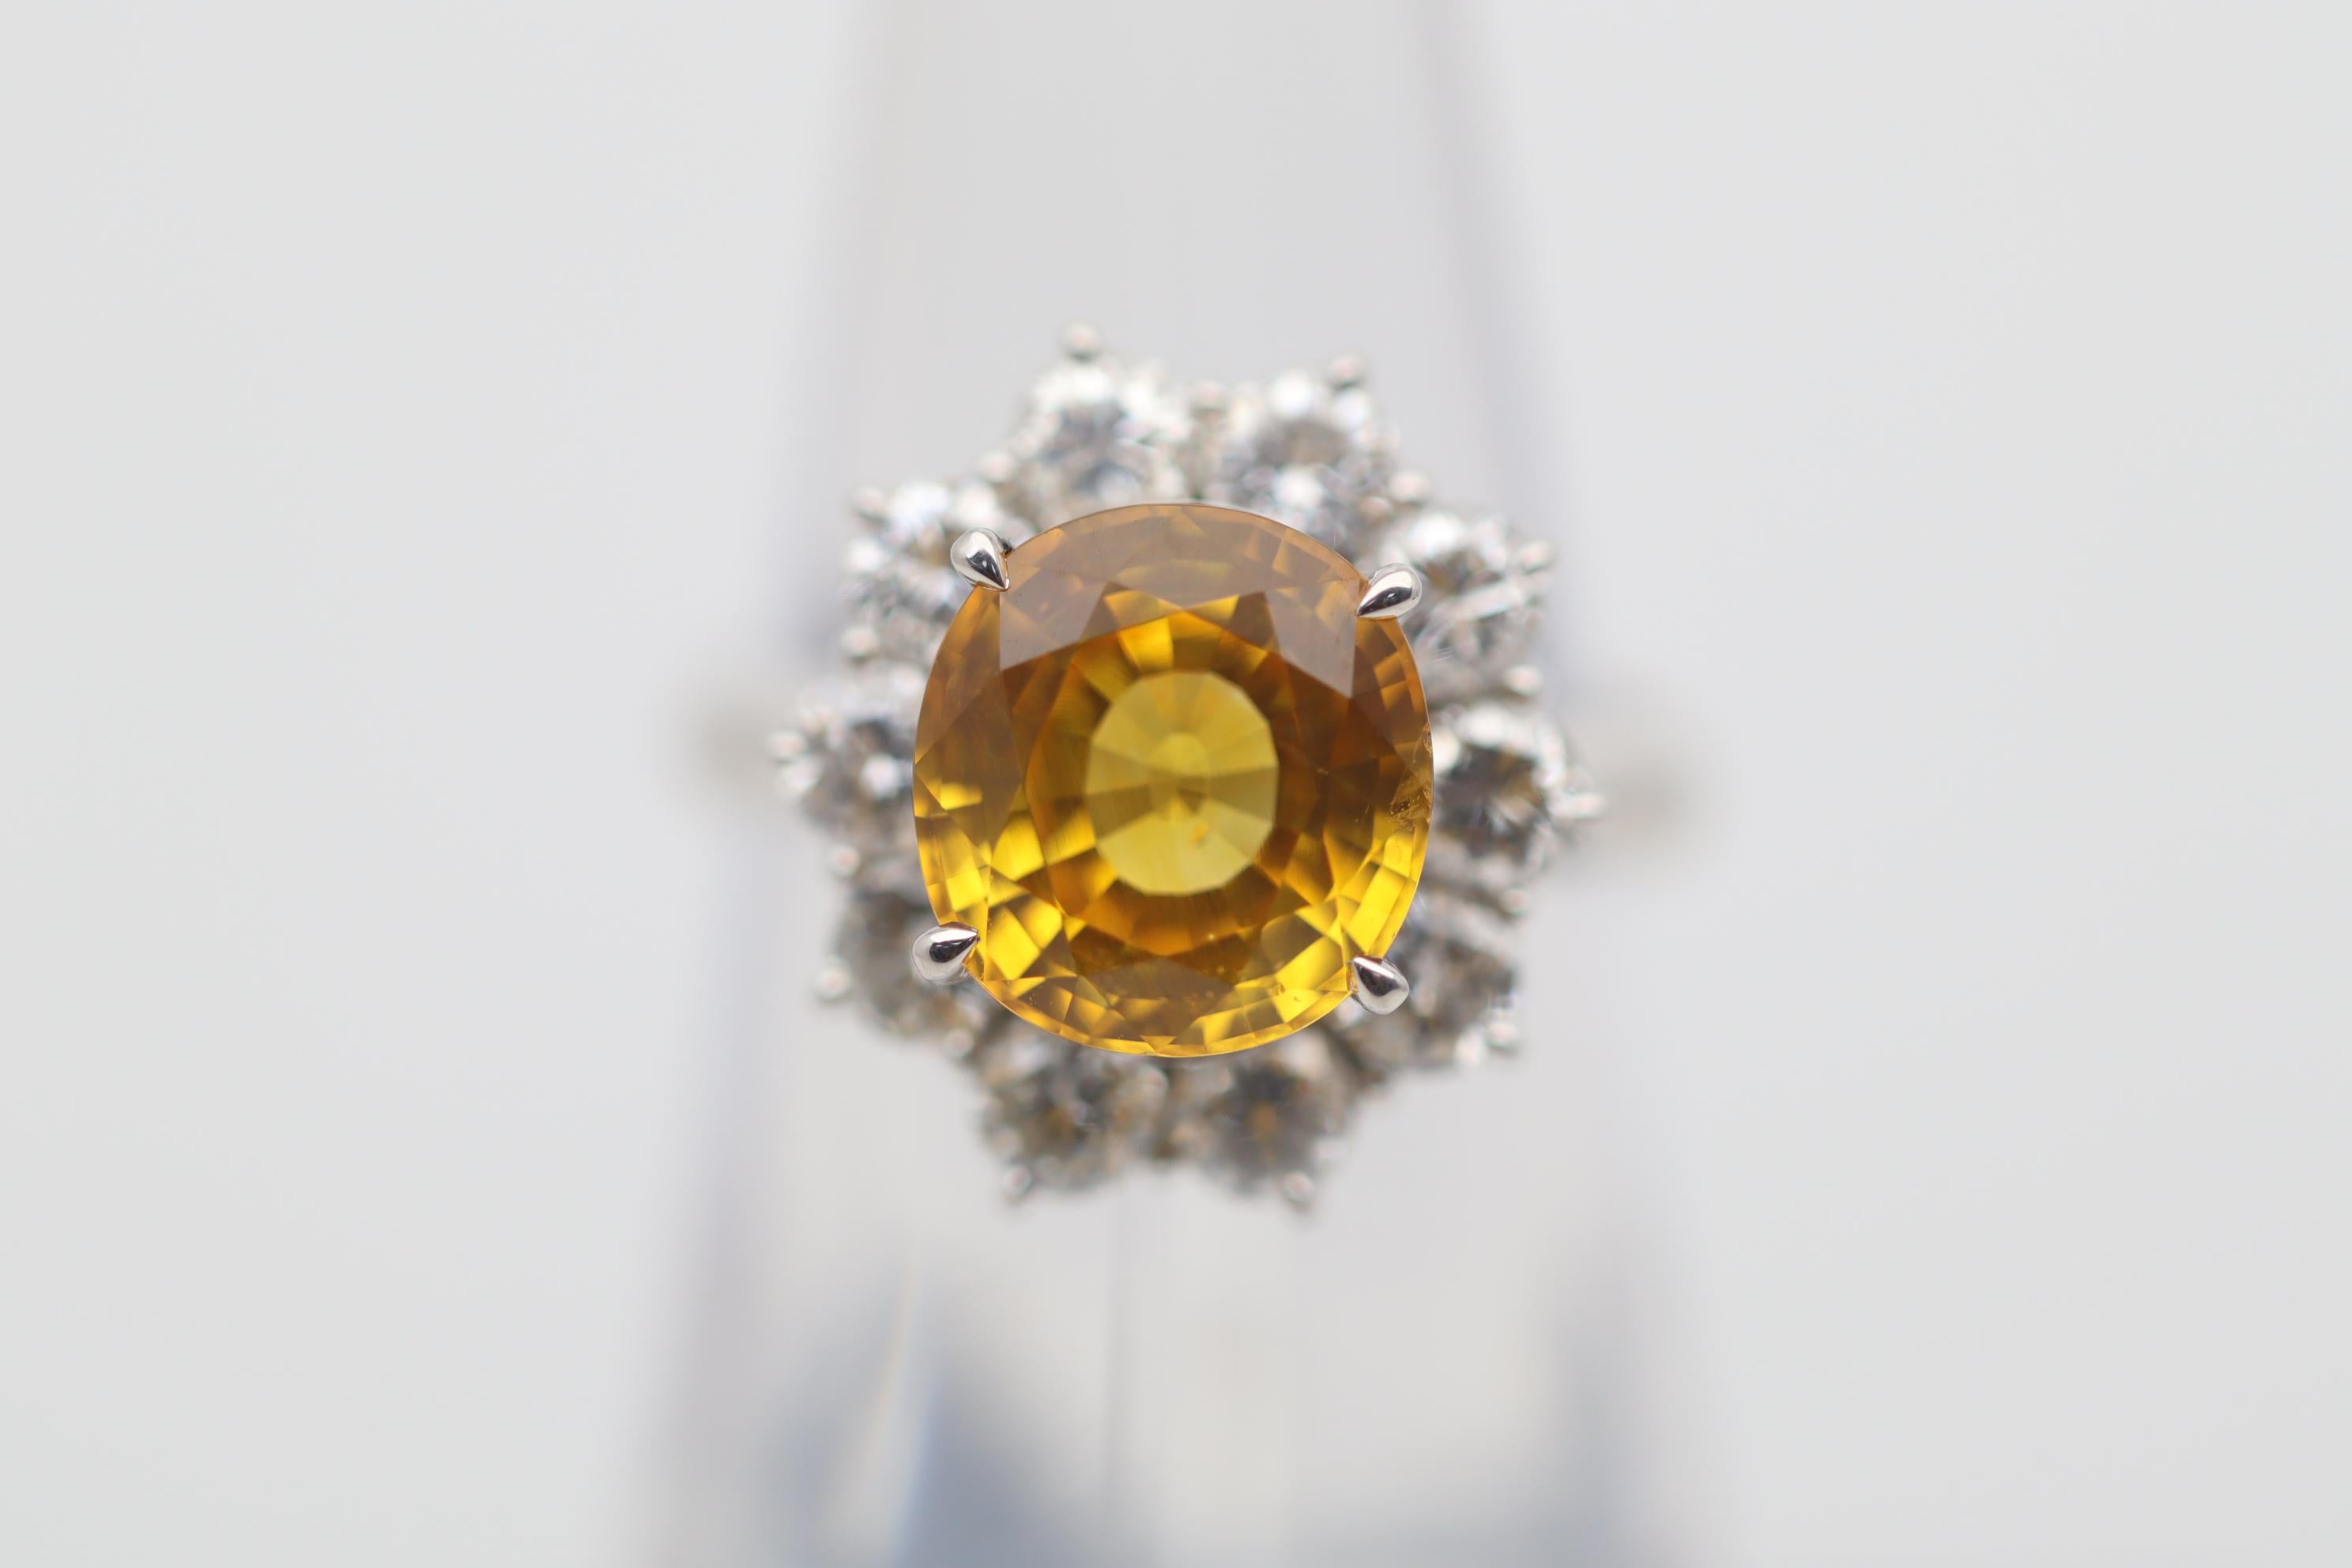 Here we have a lovely platinum ring with a fine orange sapphire weighing an impressive 4.68 carats. It has a bright, vivid yellowish-orange color that is full of brilliance and sparkle which makes the color even more impressive. It is complemented